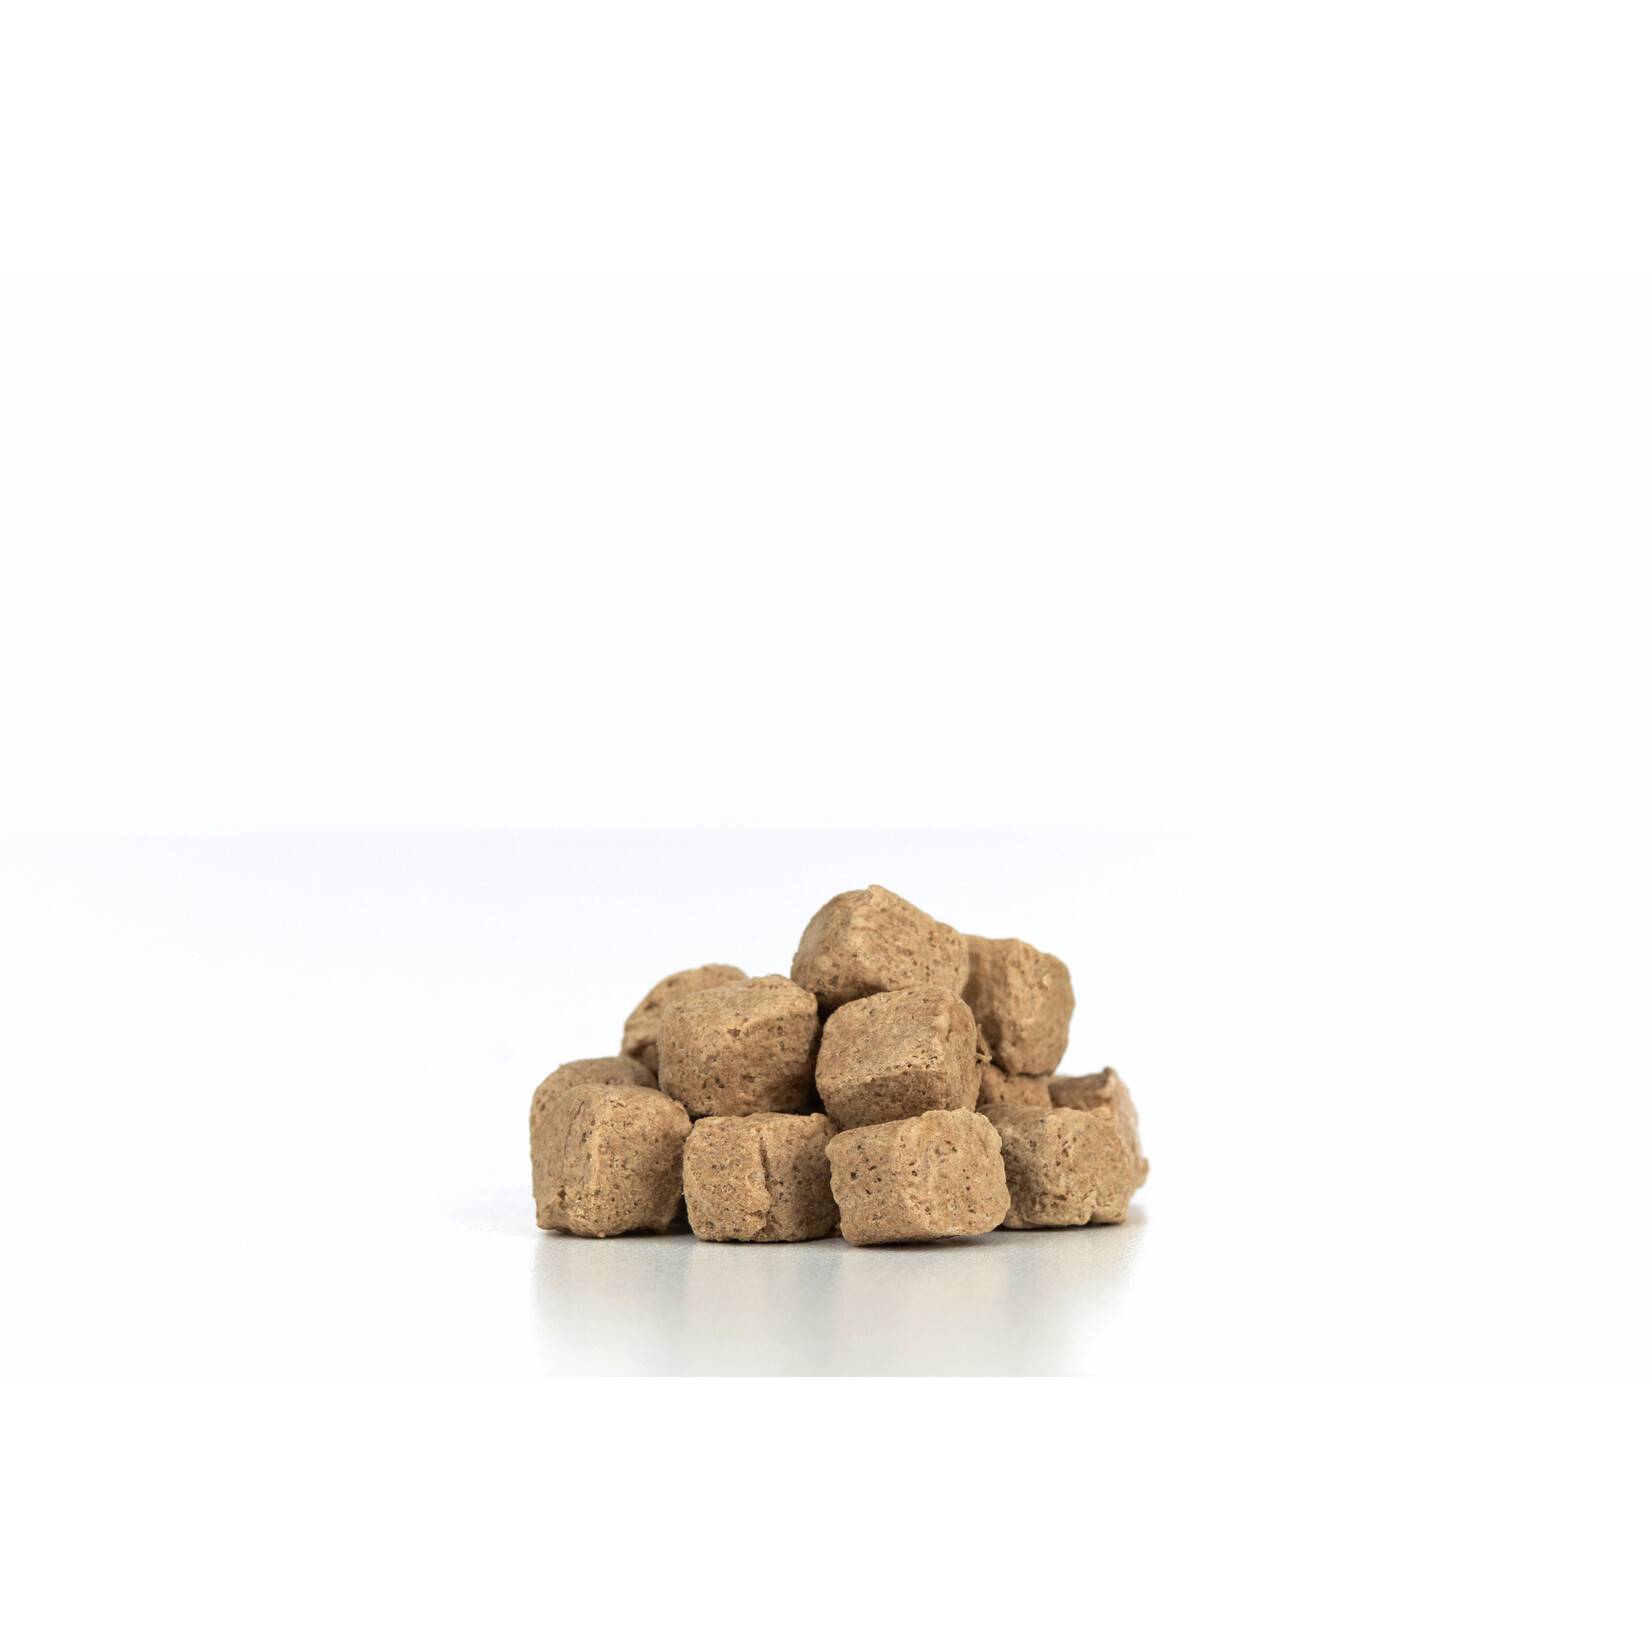 Primal Pet Foods You Maple My Day - Pork, Maple & Goat Milk Treats for Dogs